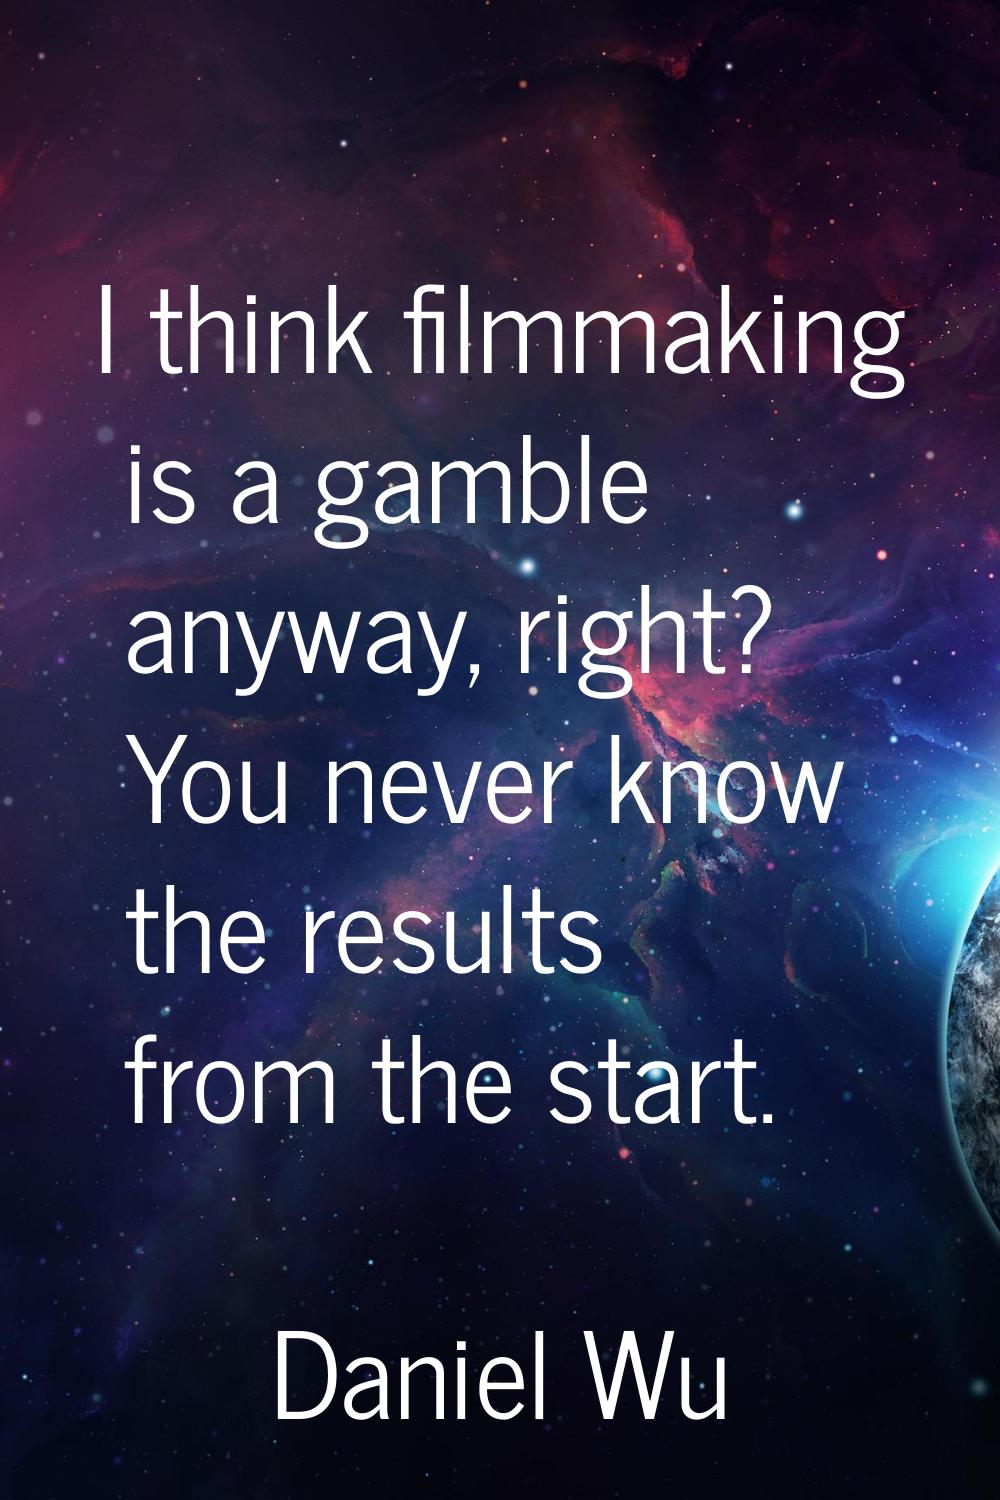 I think filmmaking is a gamble anyway, right? You never know the results from the start.